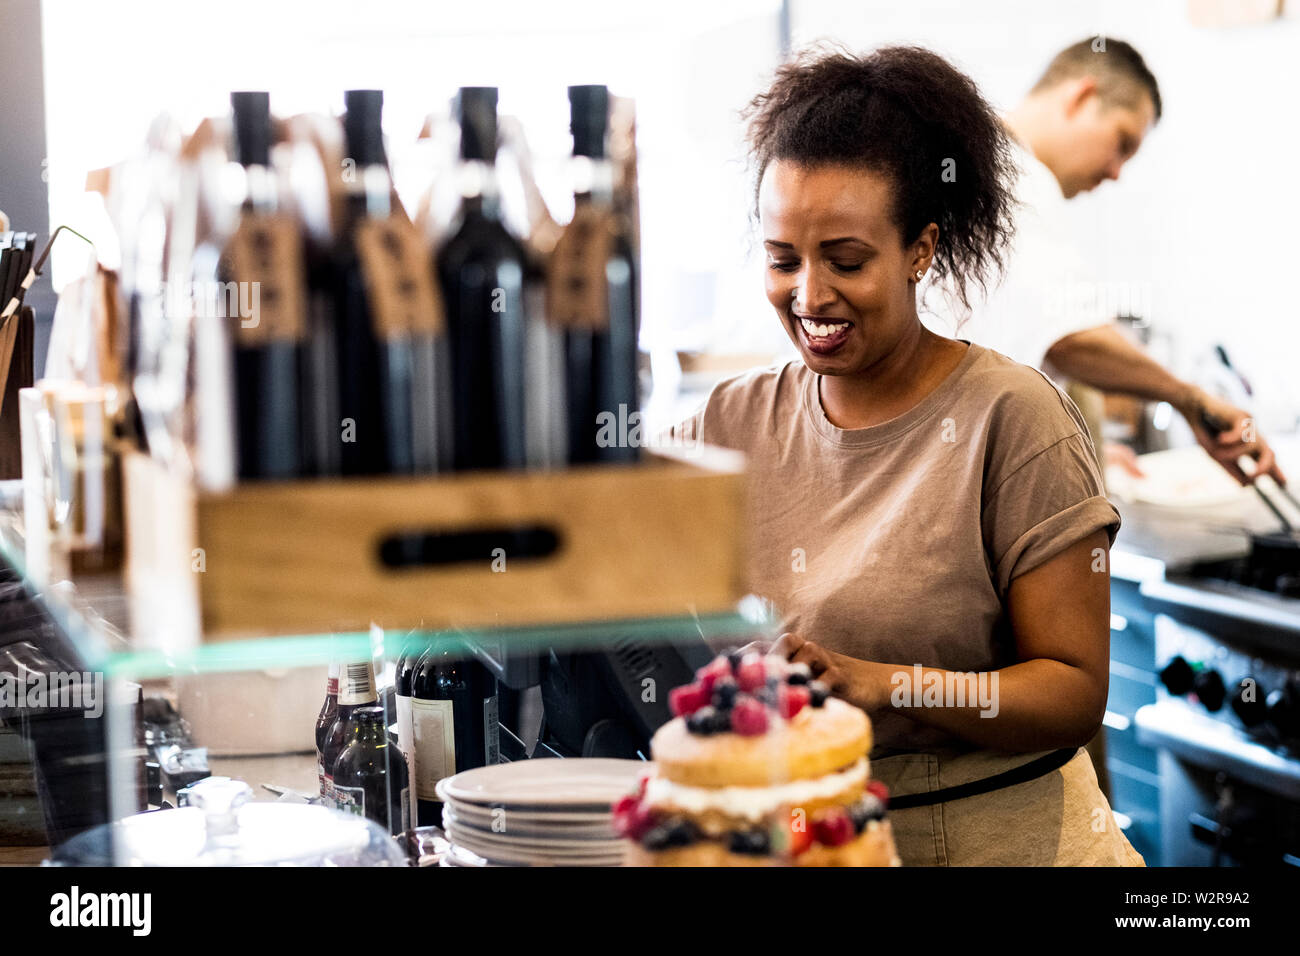 A woman working in a cafe, a stack of plates, and a layered sponge cake with fresh cream and fresh fruit. Stock Photo